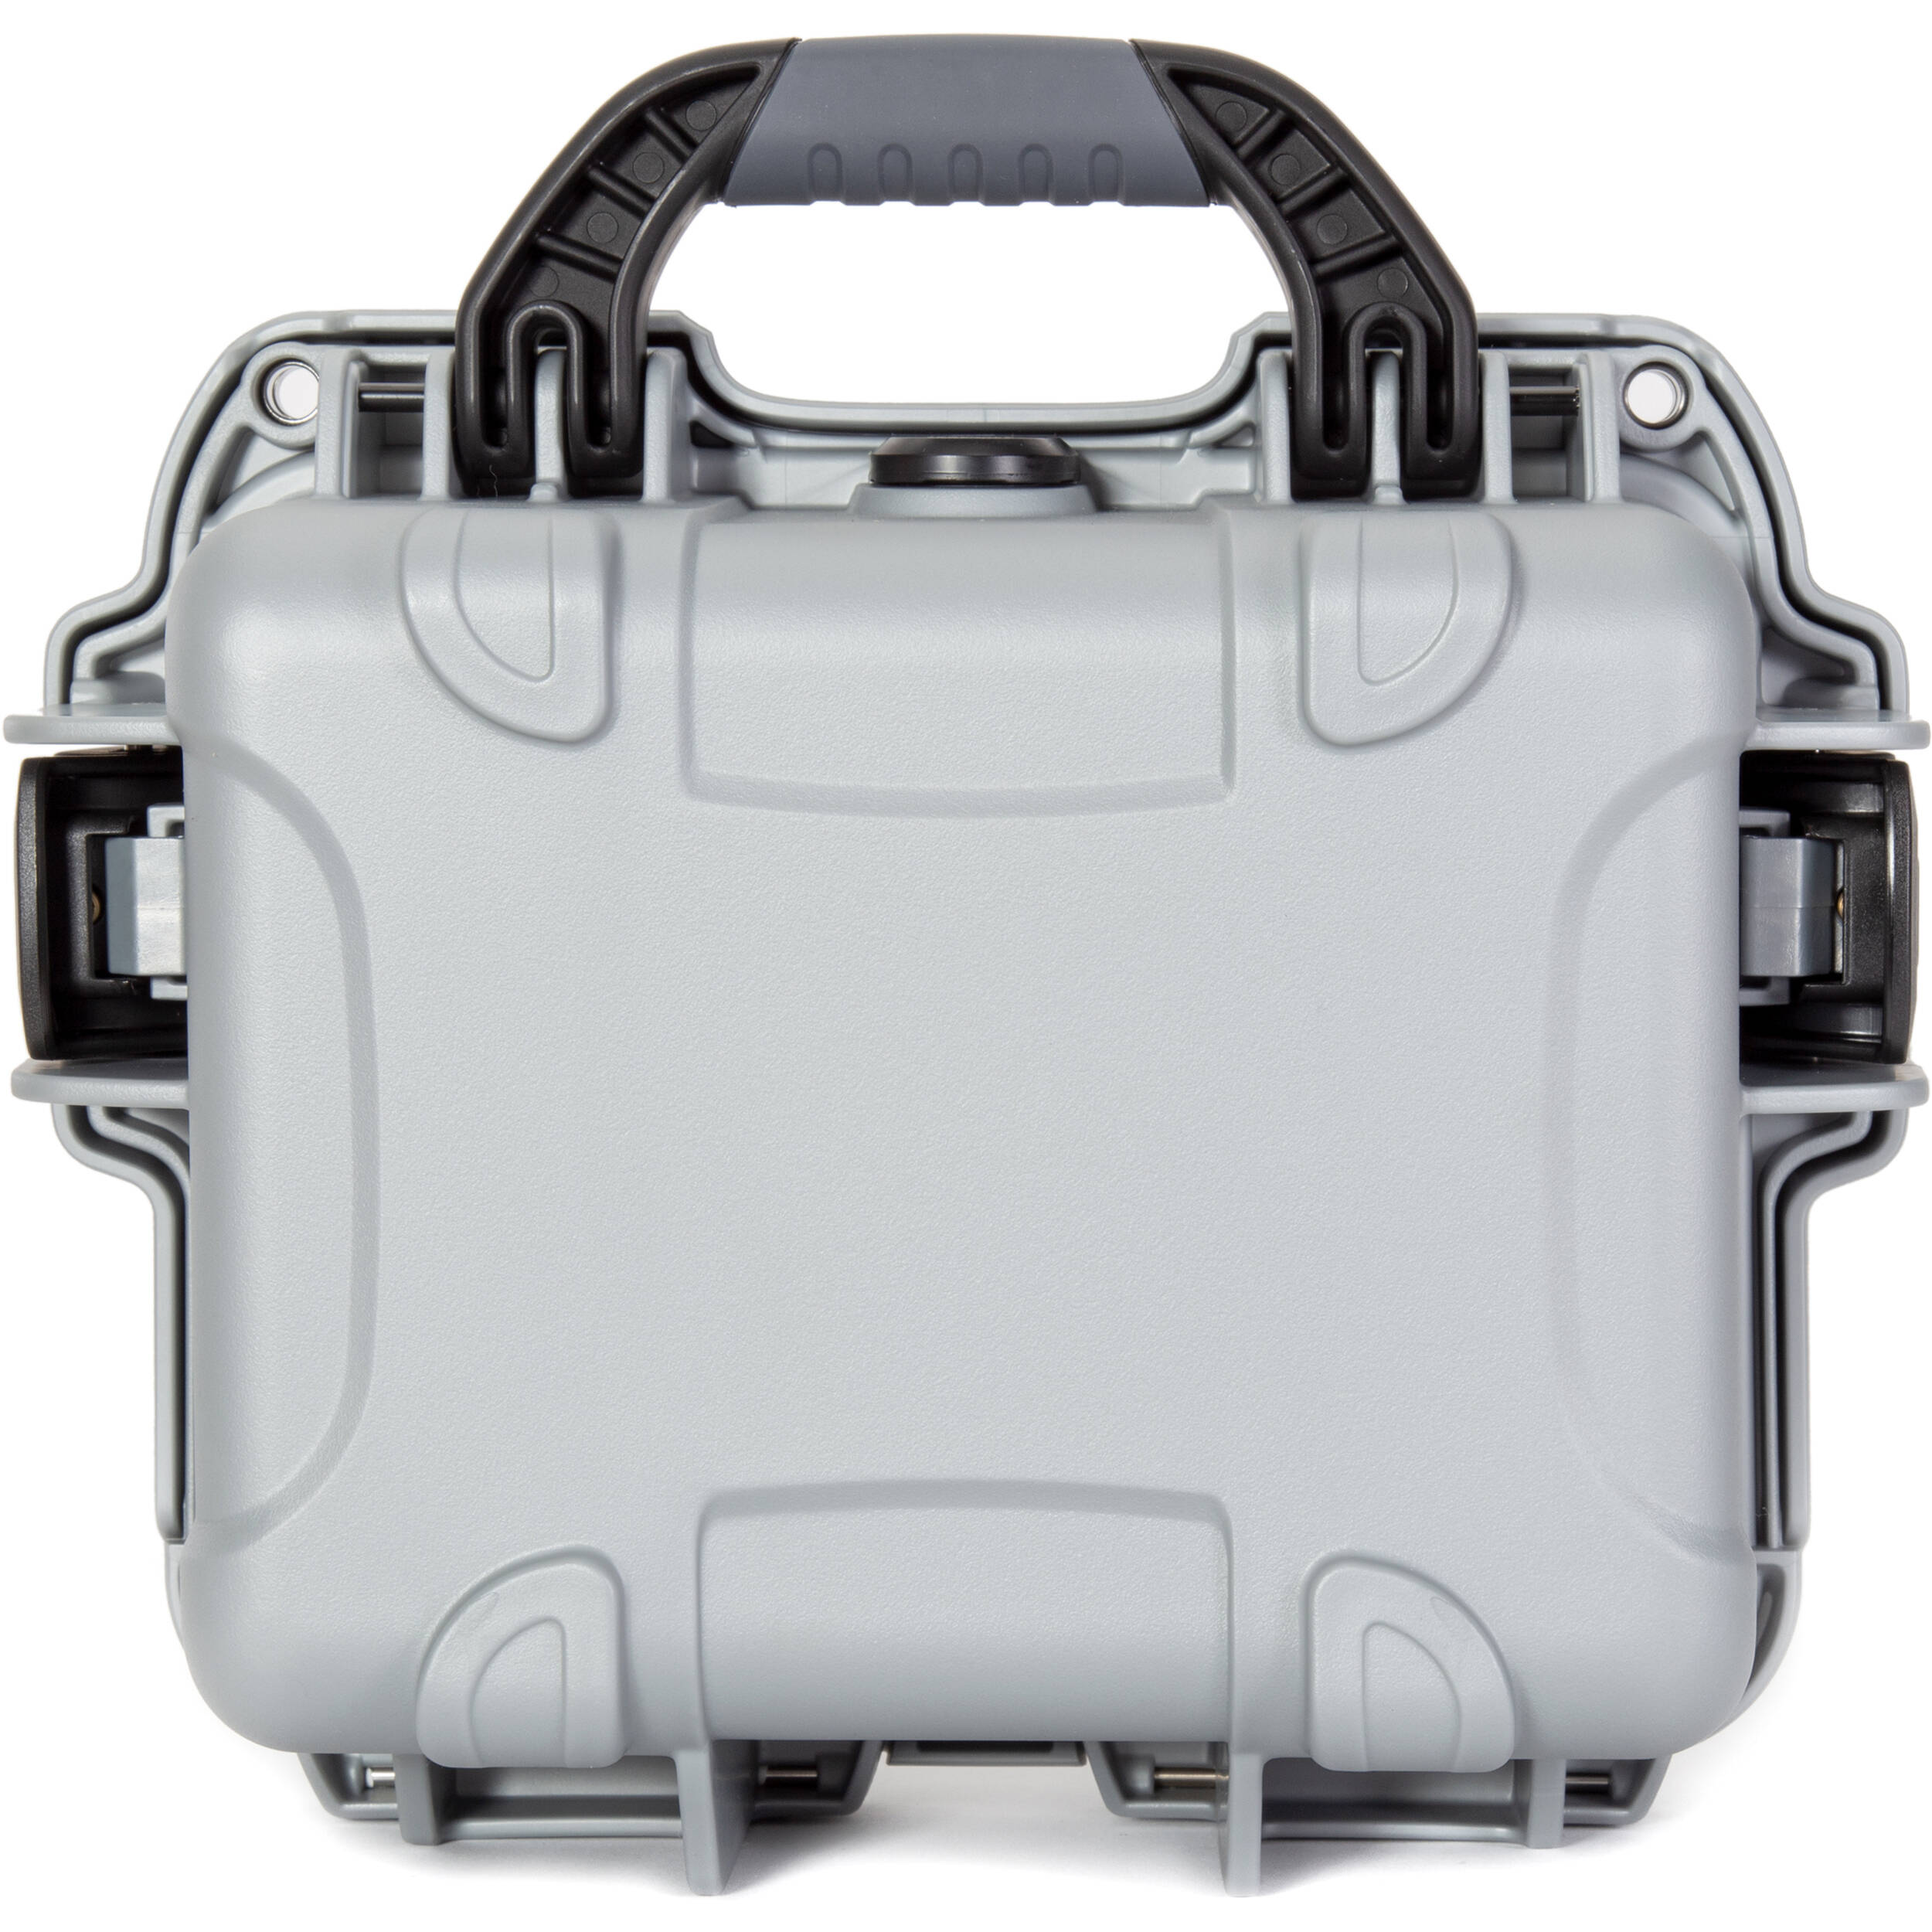 Nanuk 905 Waterproof Hard Case Pro Photo/Video Kit with Padded Dividers and Lid Organizer (Silver)